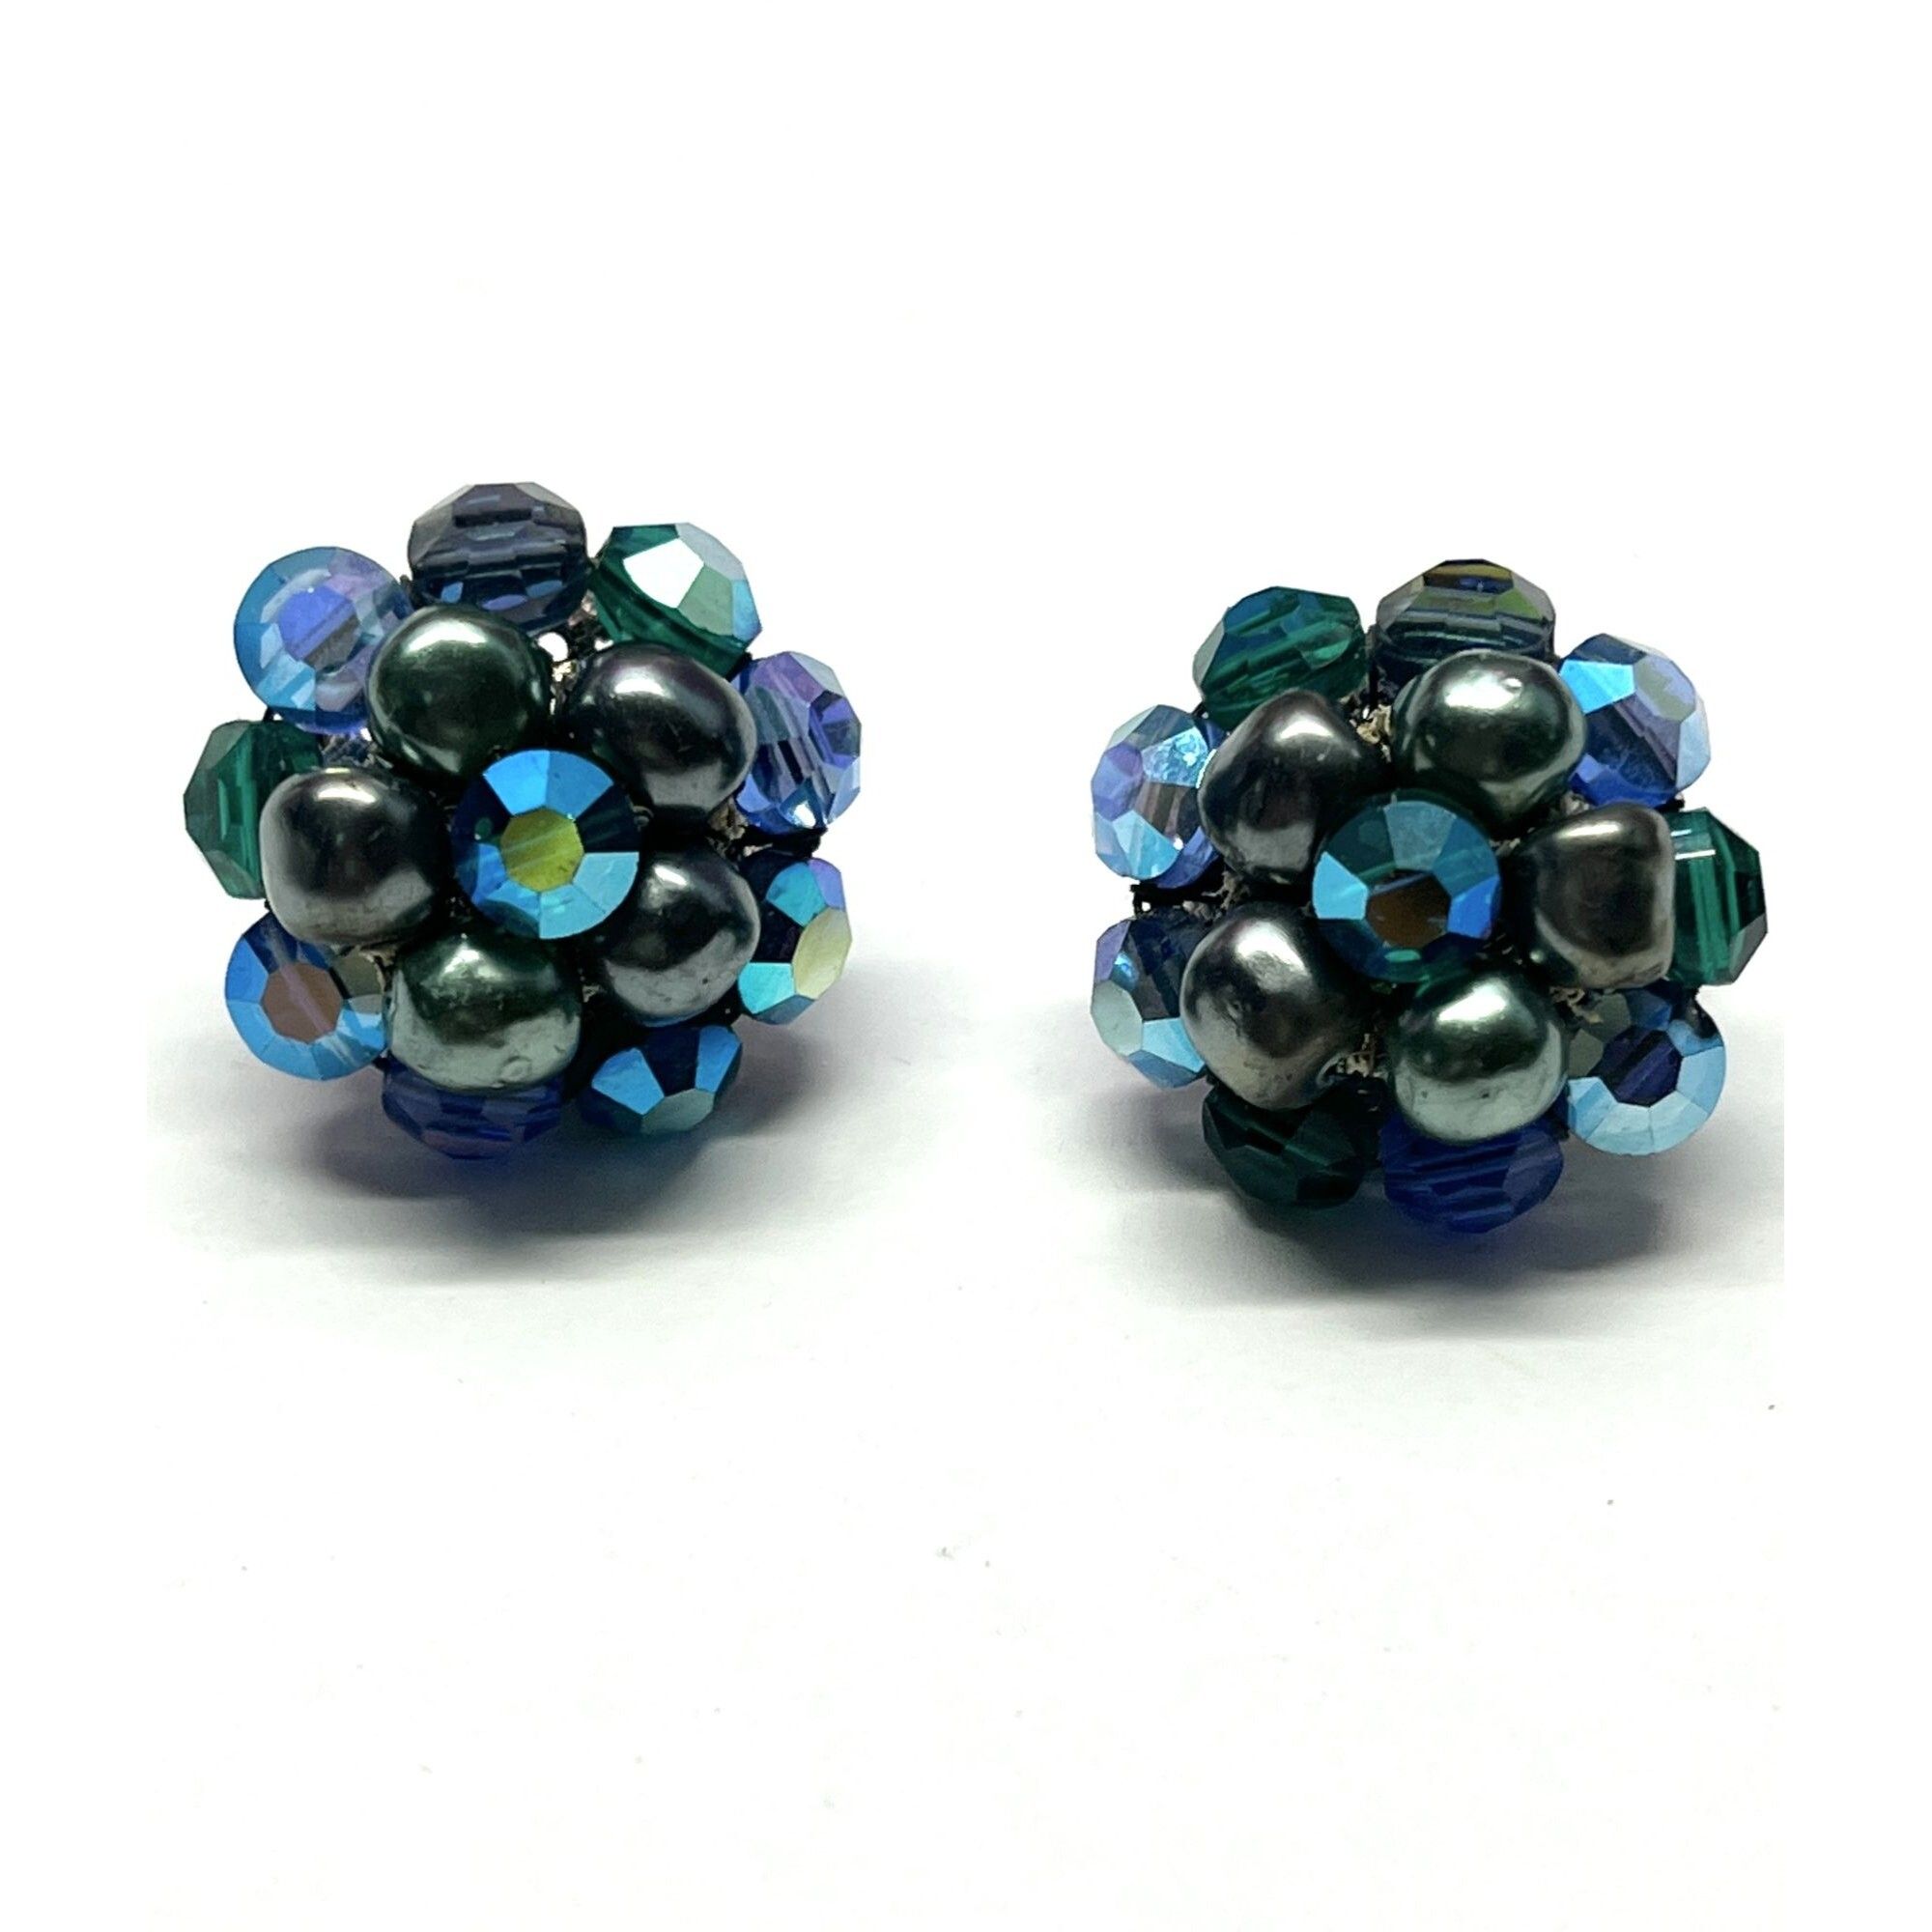 Vogue Vintage Vogue Blue Crystal Cluster Earrings Size ONE SIZE - 1 Preview